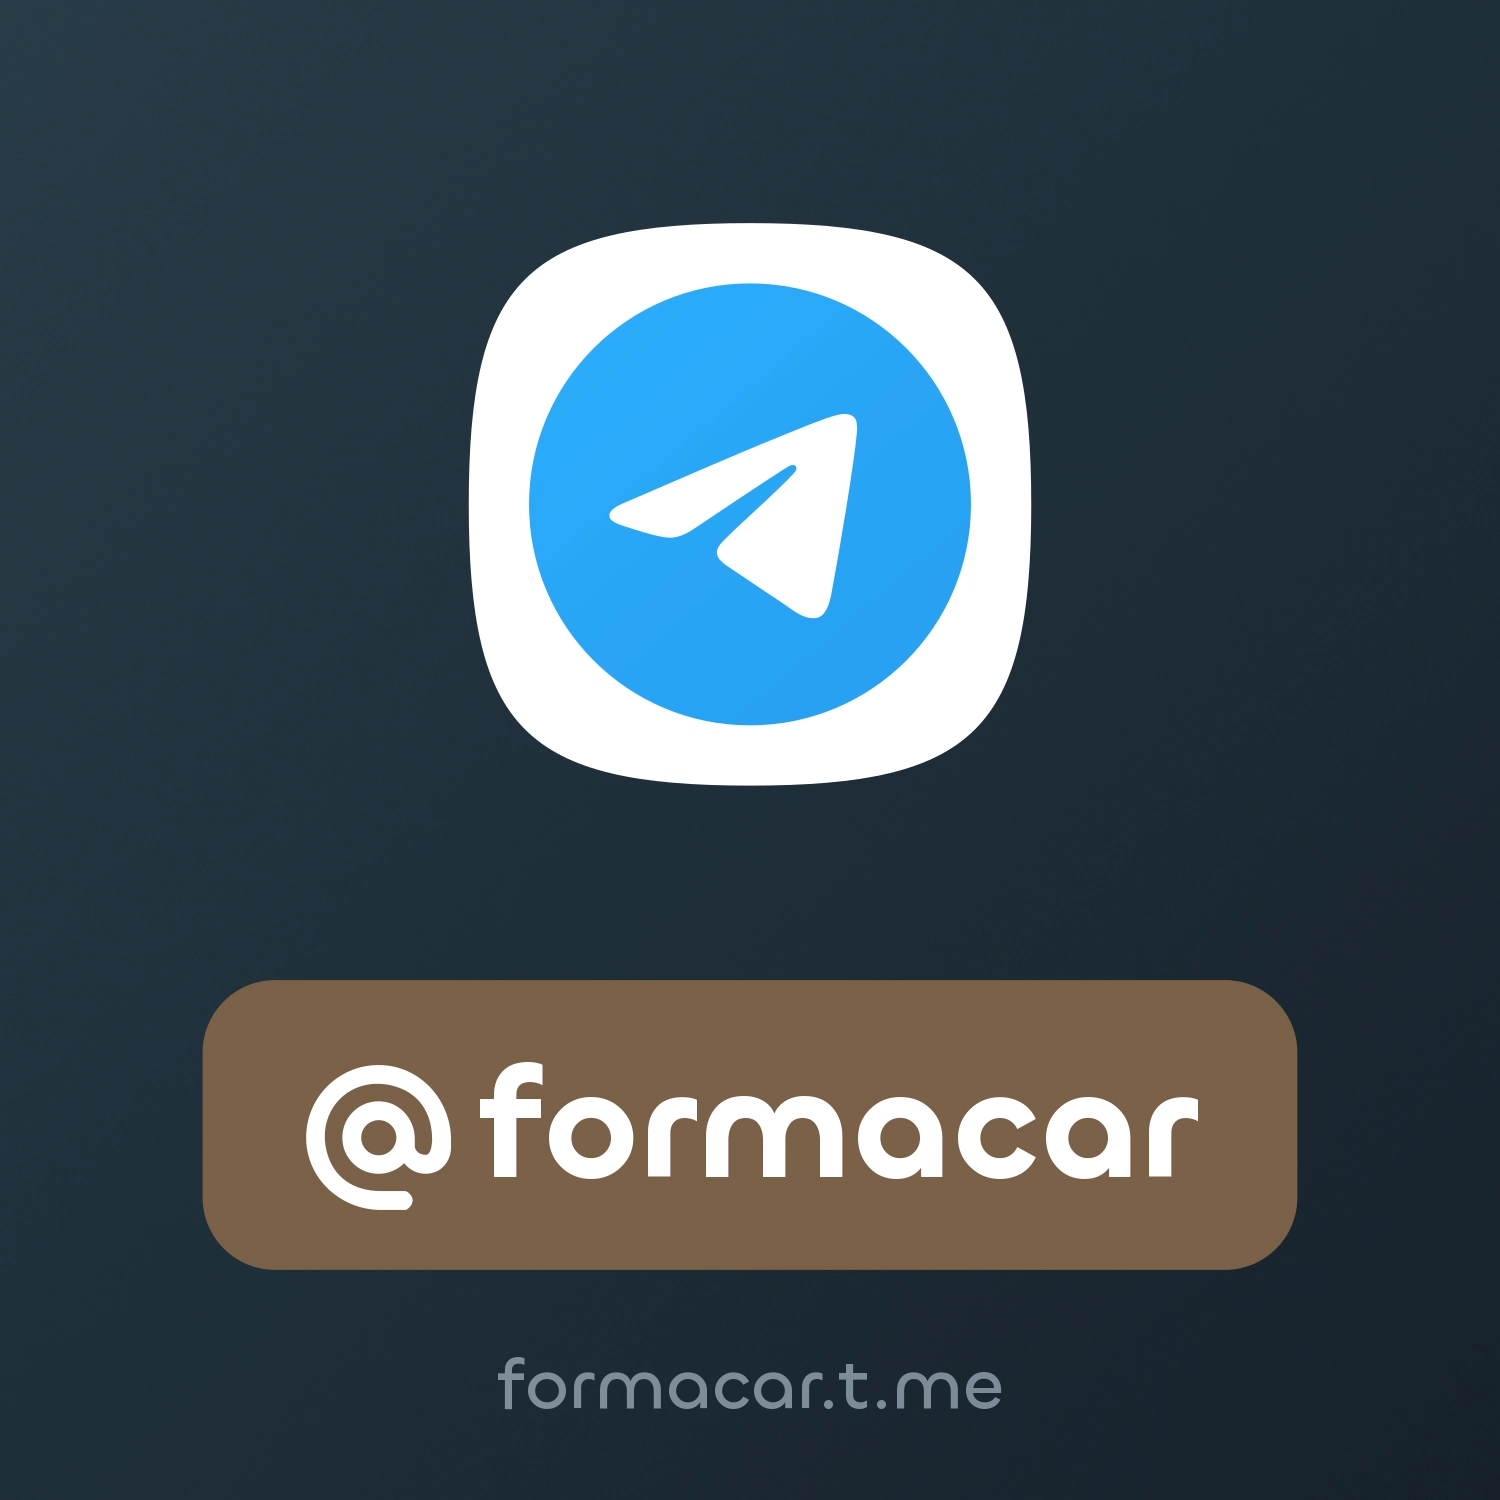 @formacar